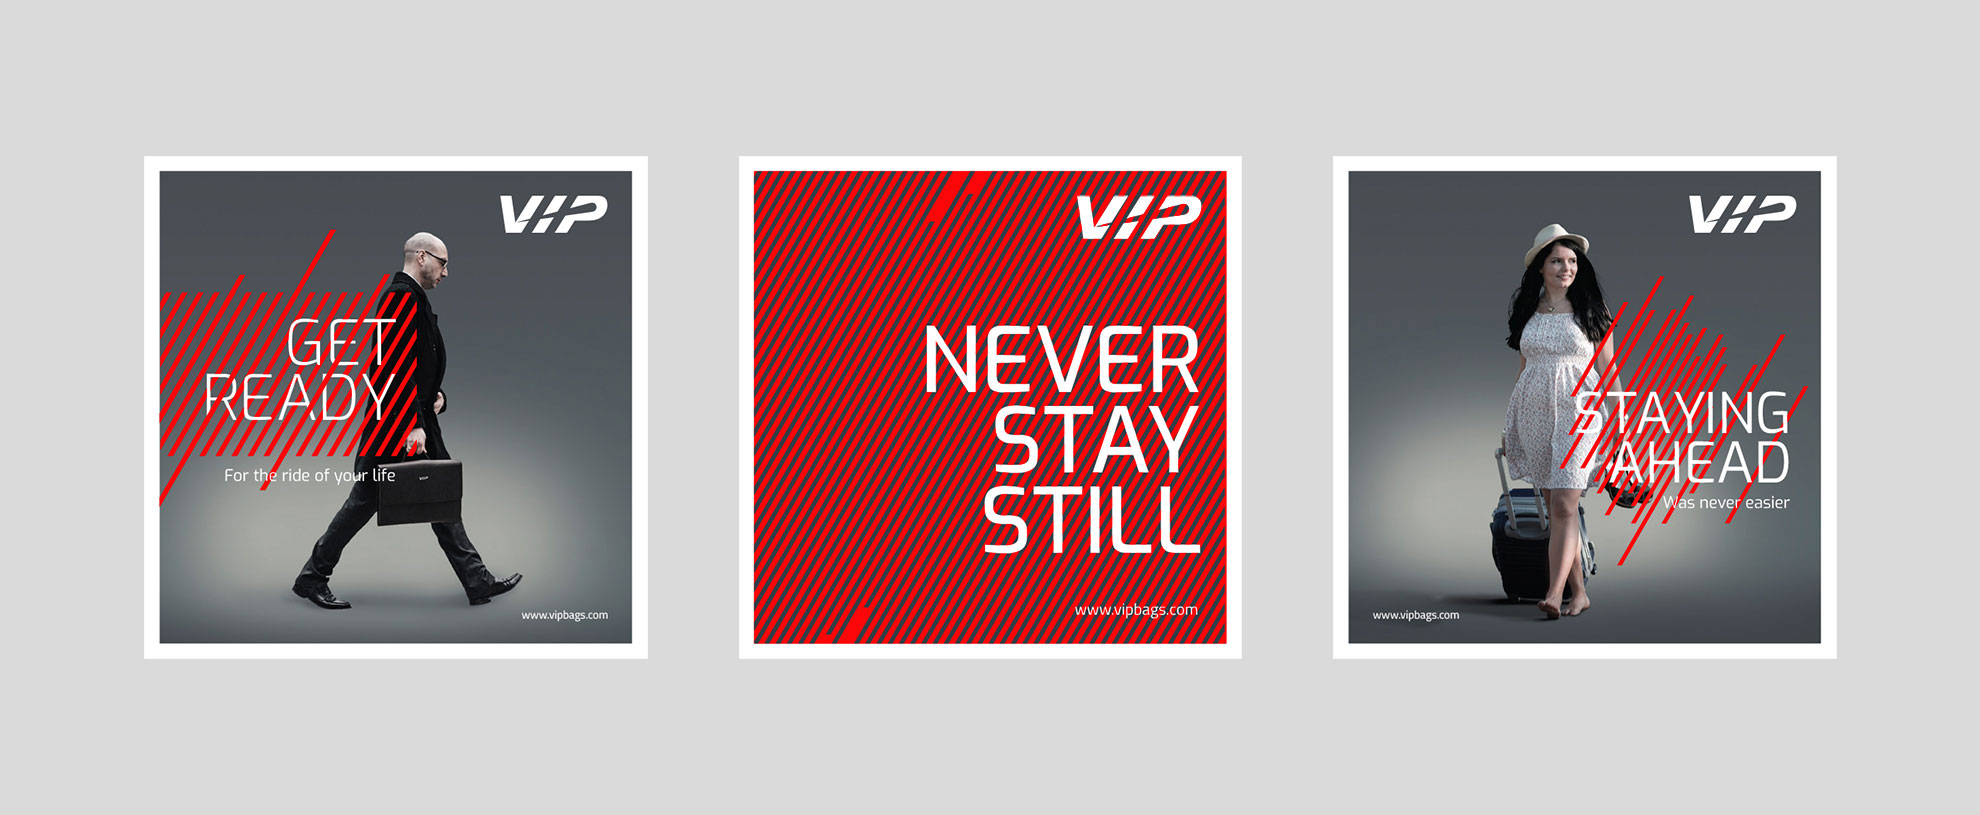 Collateral and poster design for VIP branding